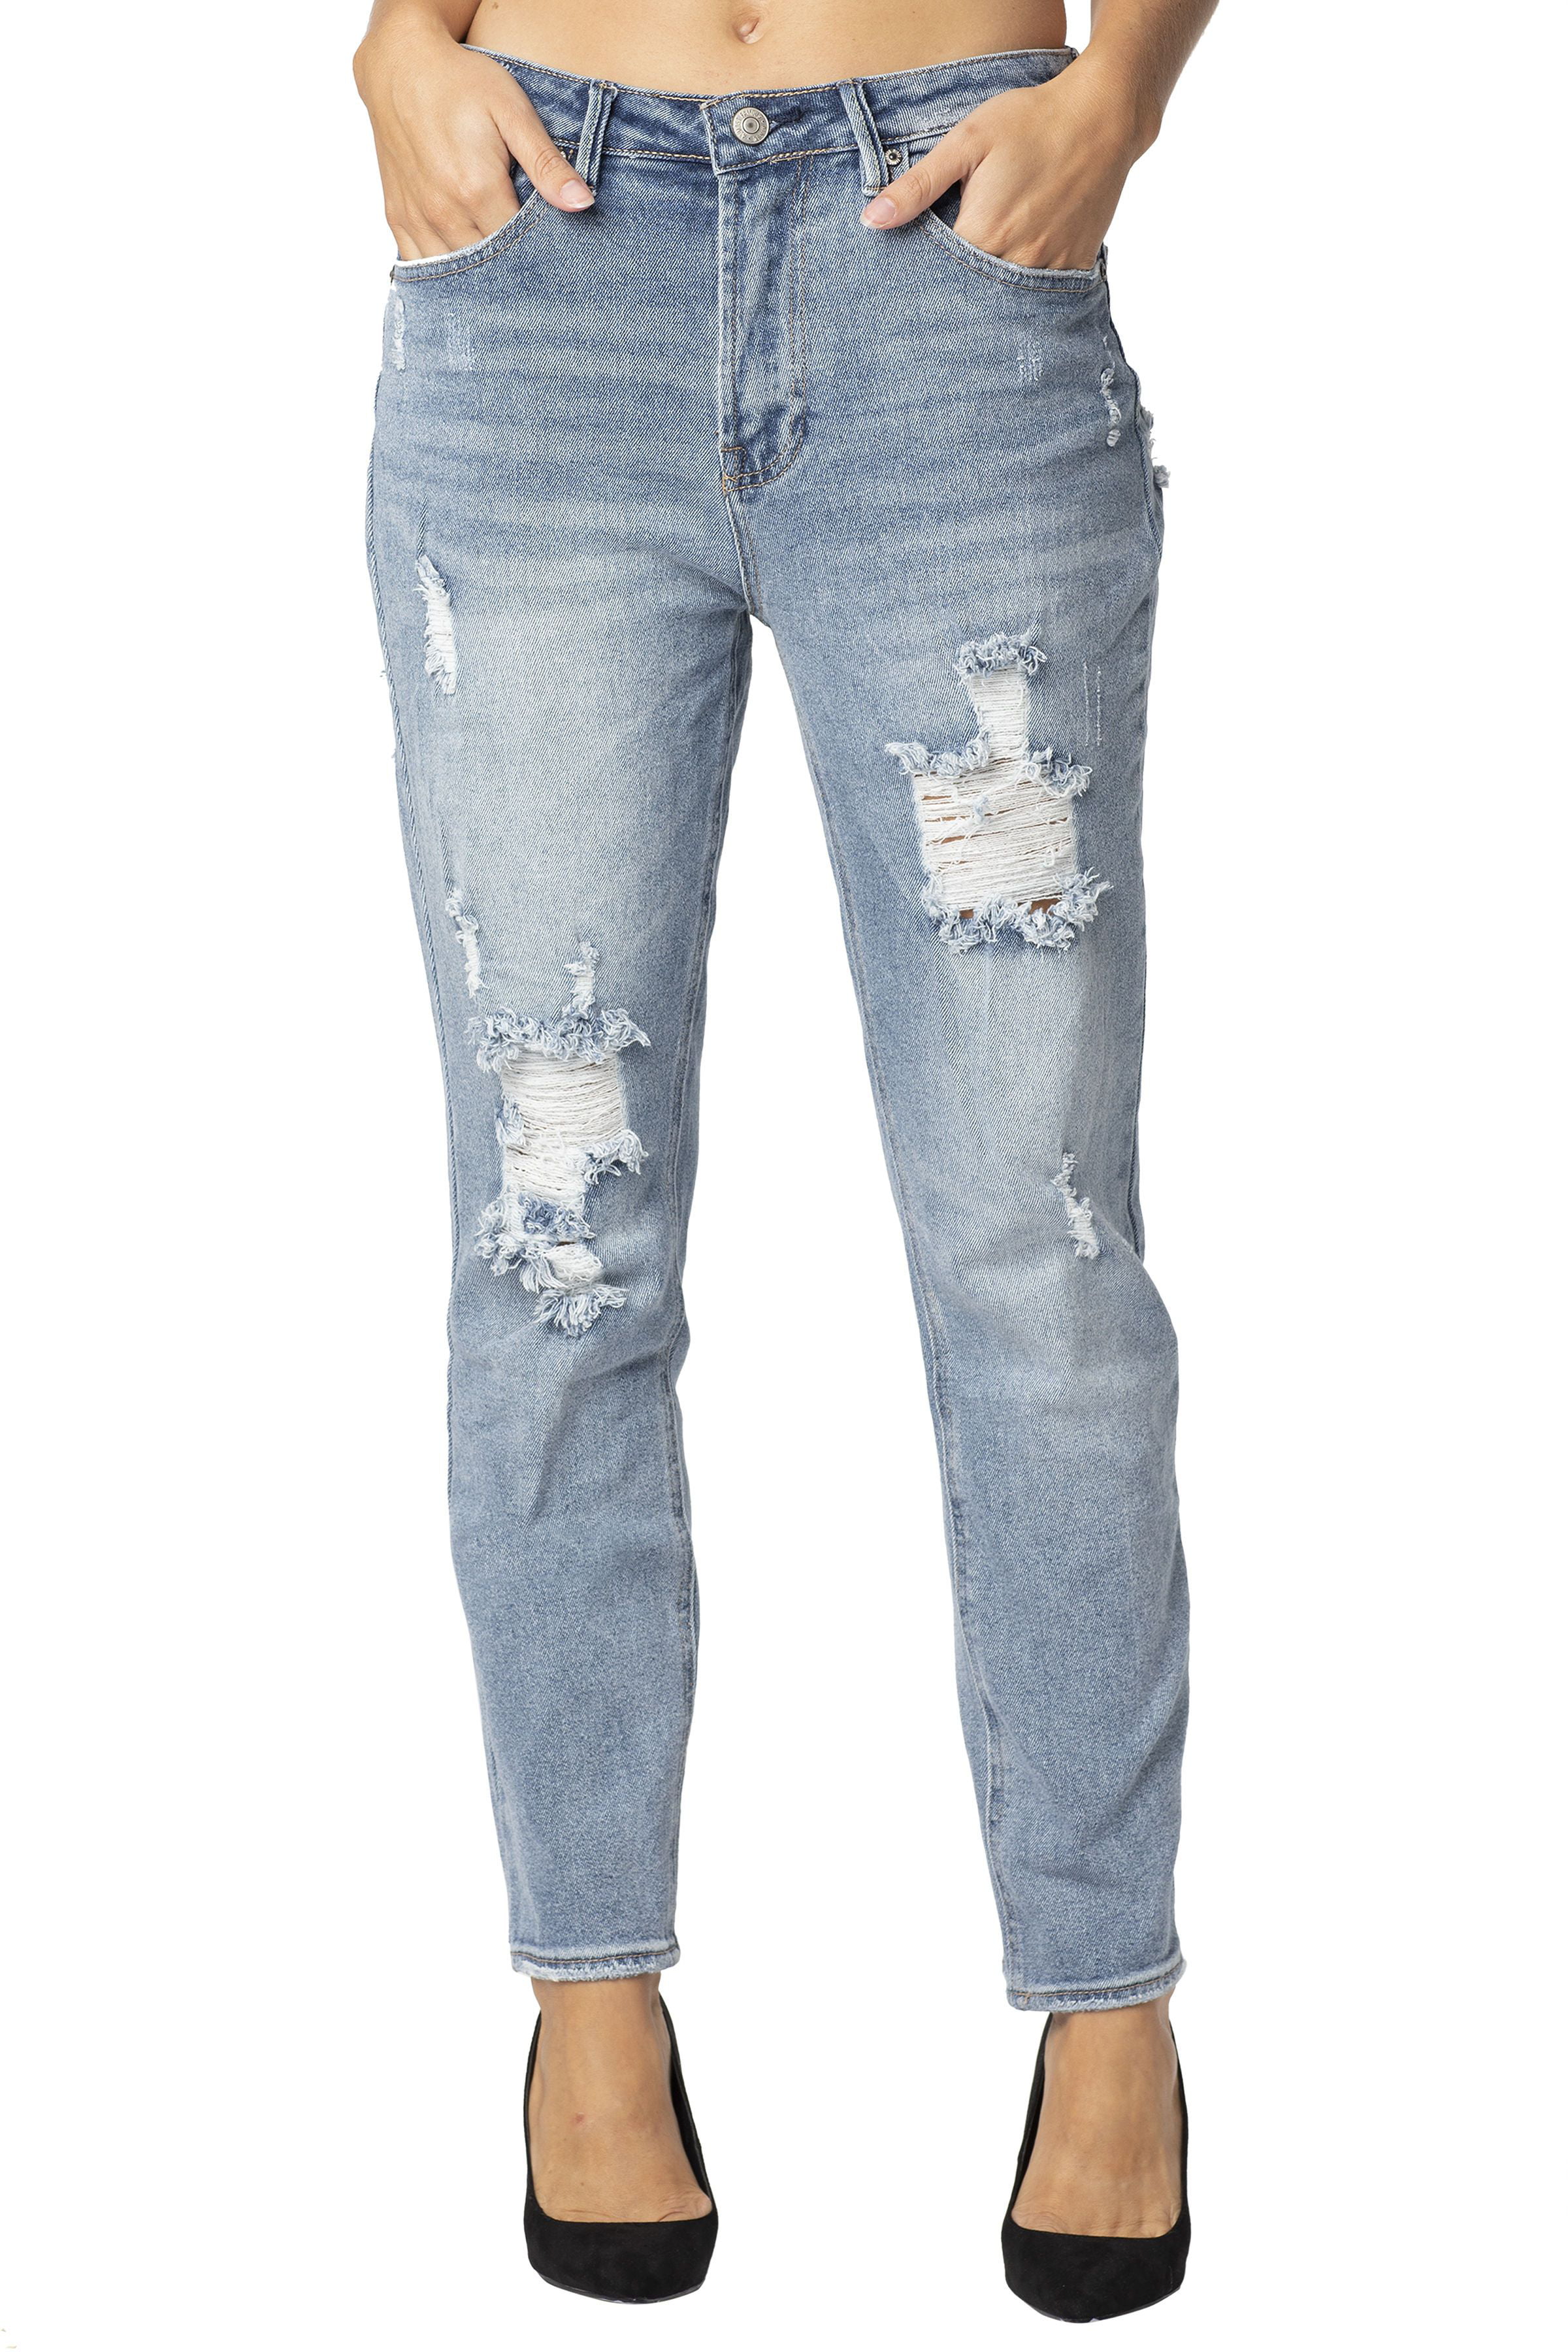 Almost Famous Juniors High Rise Cuffed Jean Denim - Vintage Ripped ...